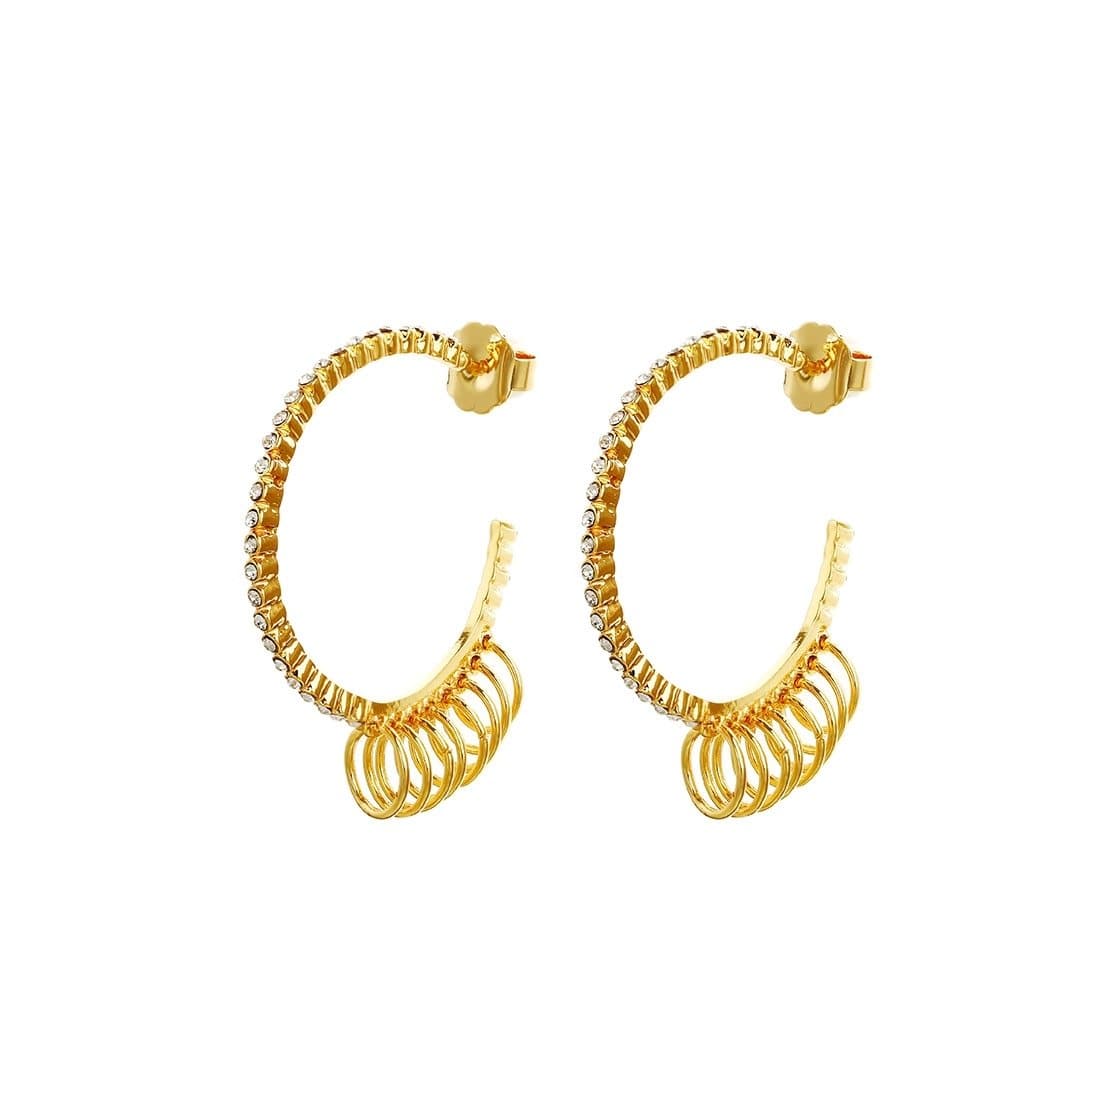 Darcy Earrings - Gold